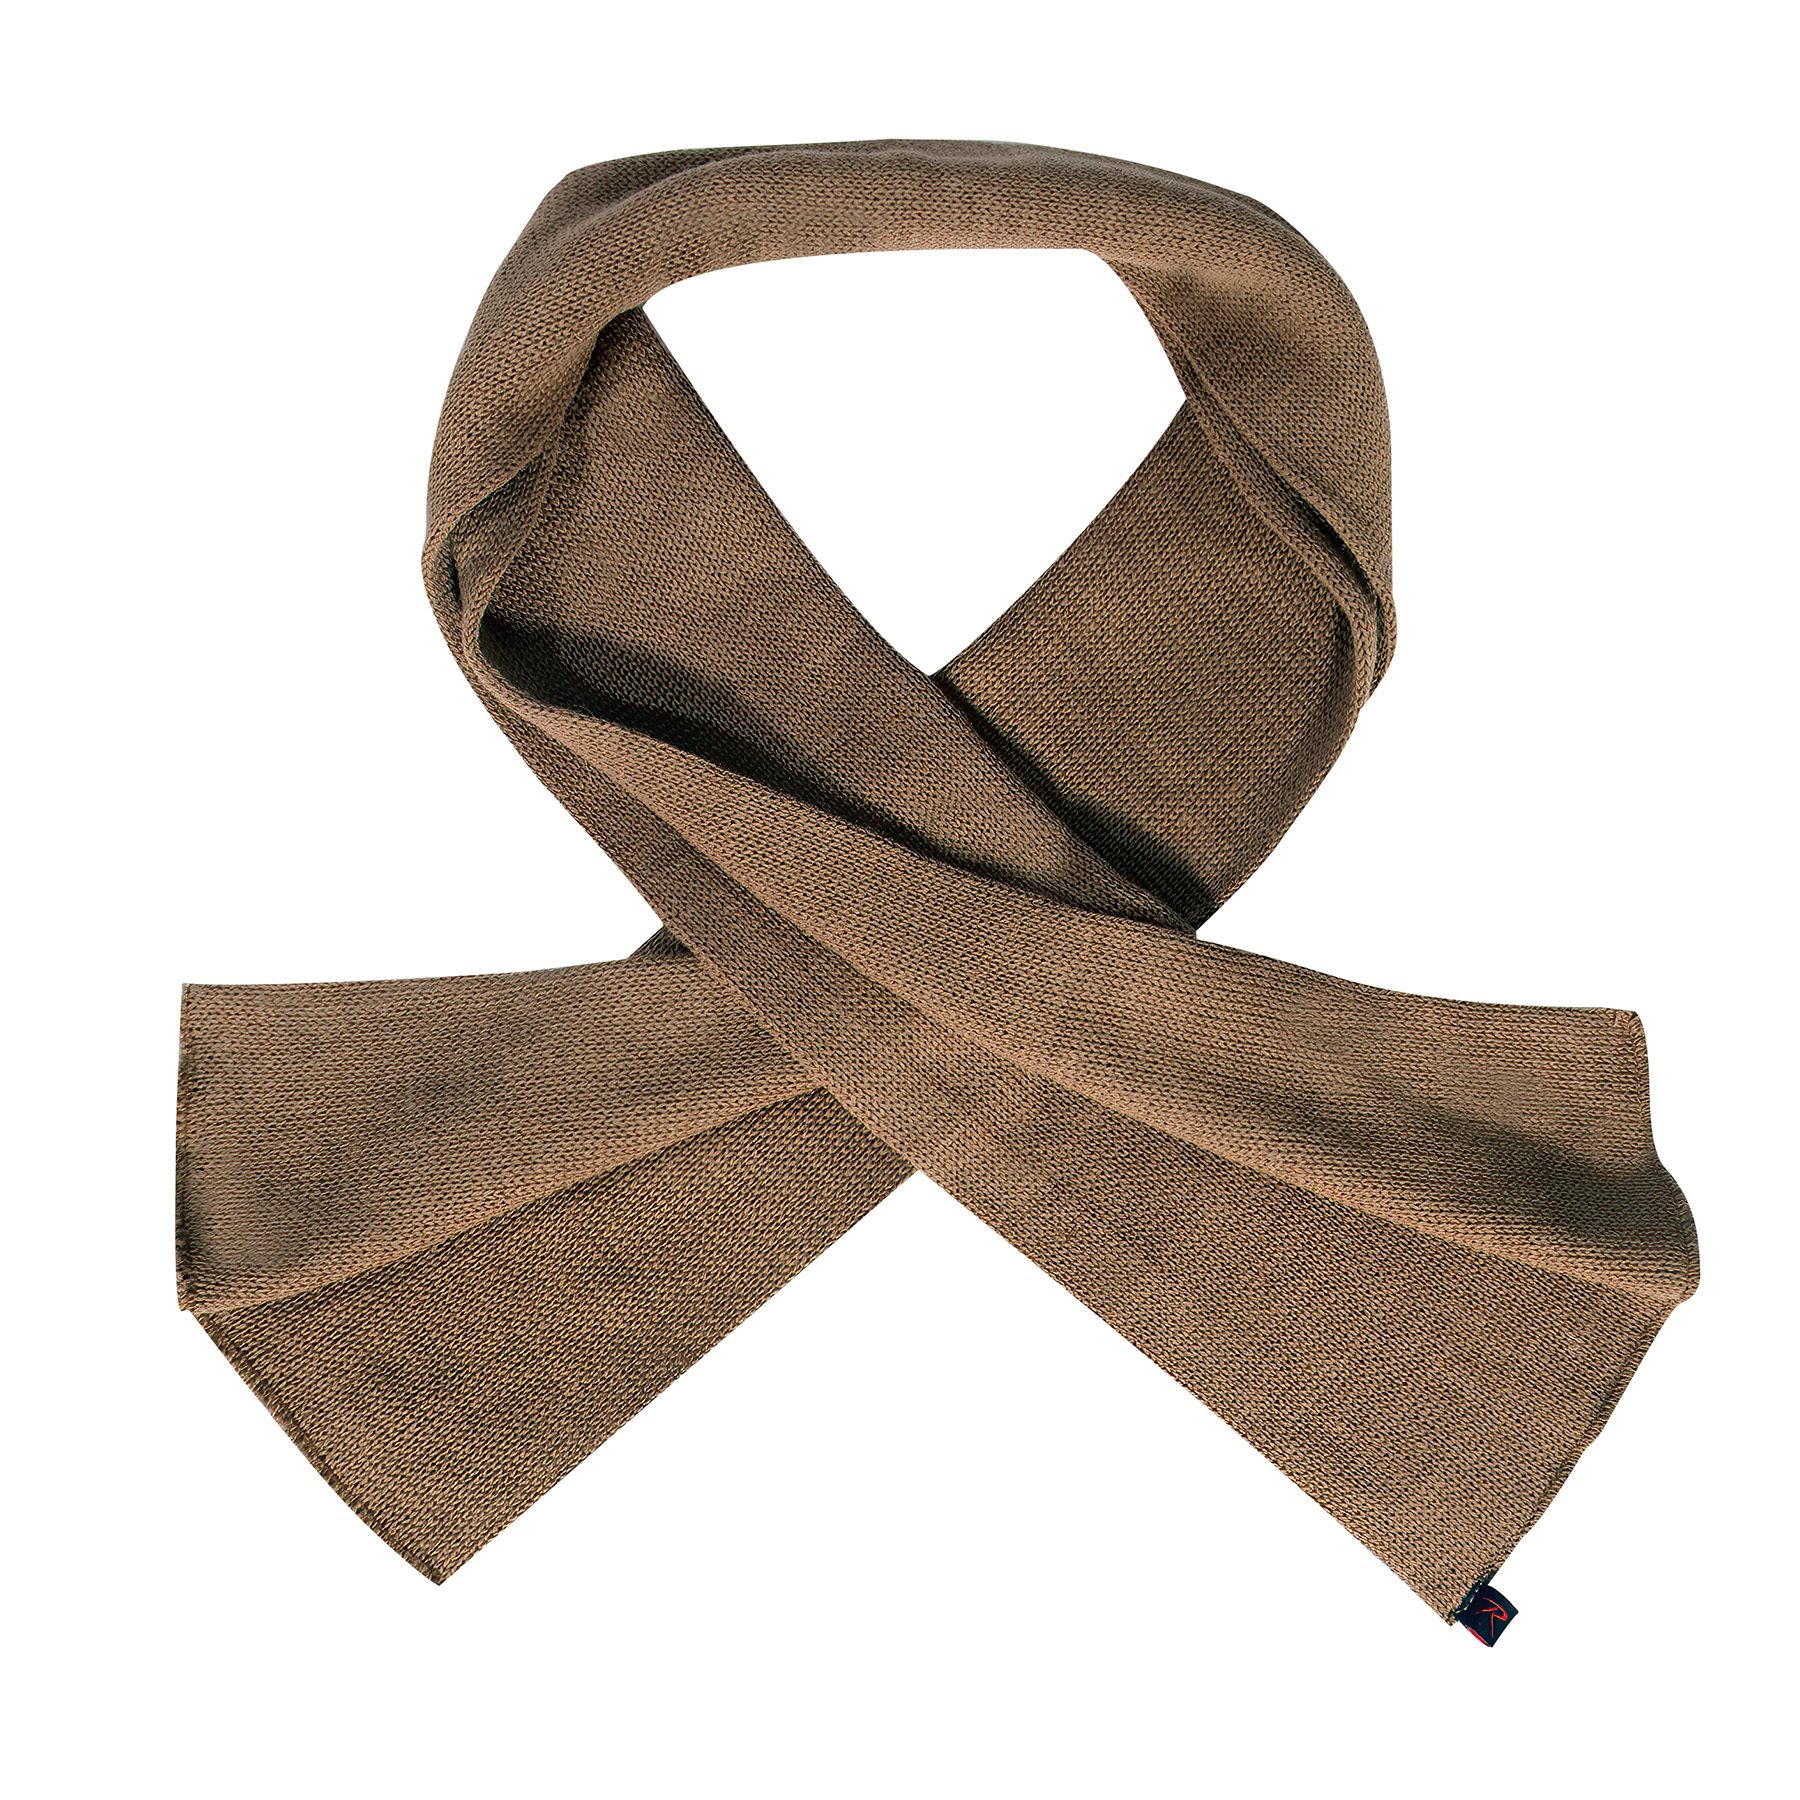 Wool Scarf COYOTE BROWN ROTHCO 84422 L-11